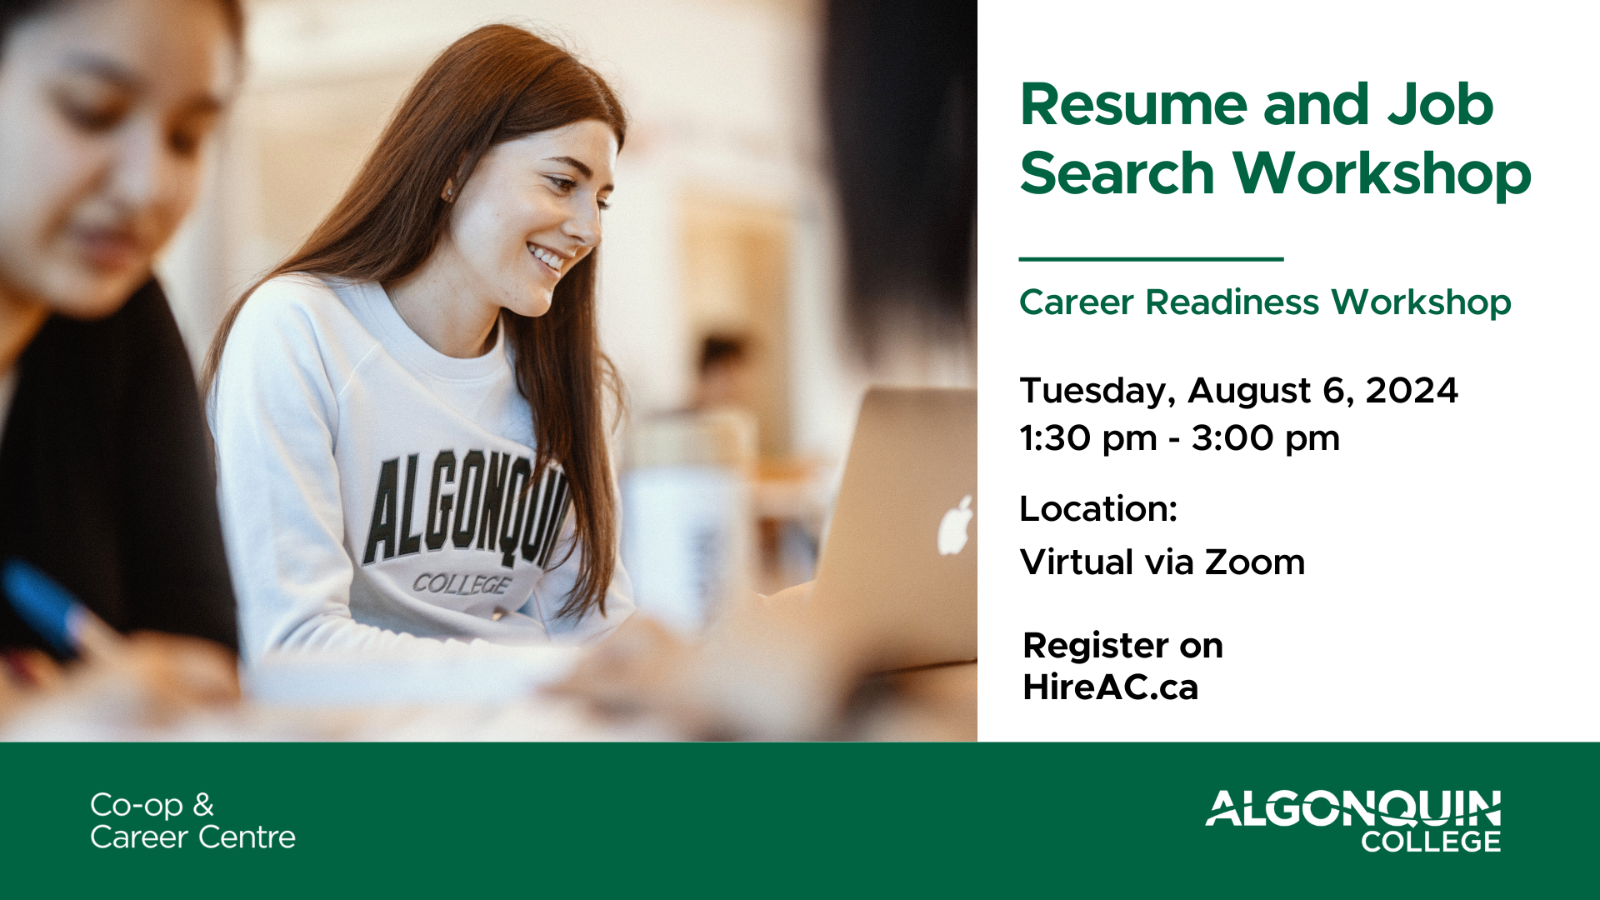 Resume and Job Search Workshop